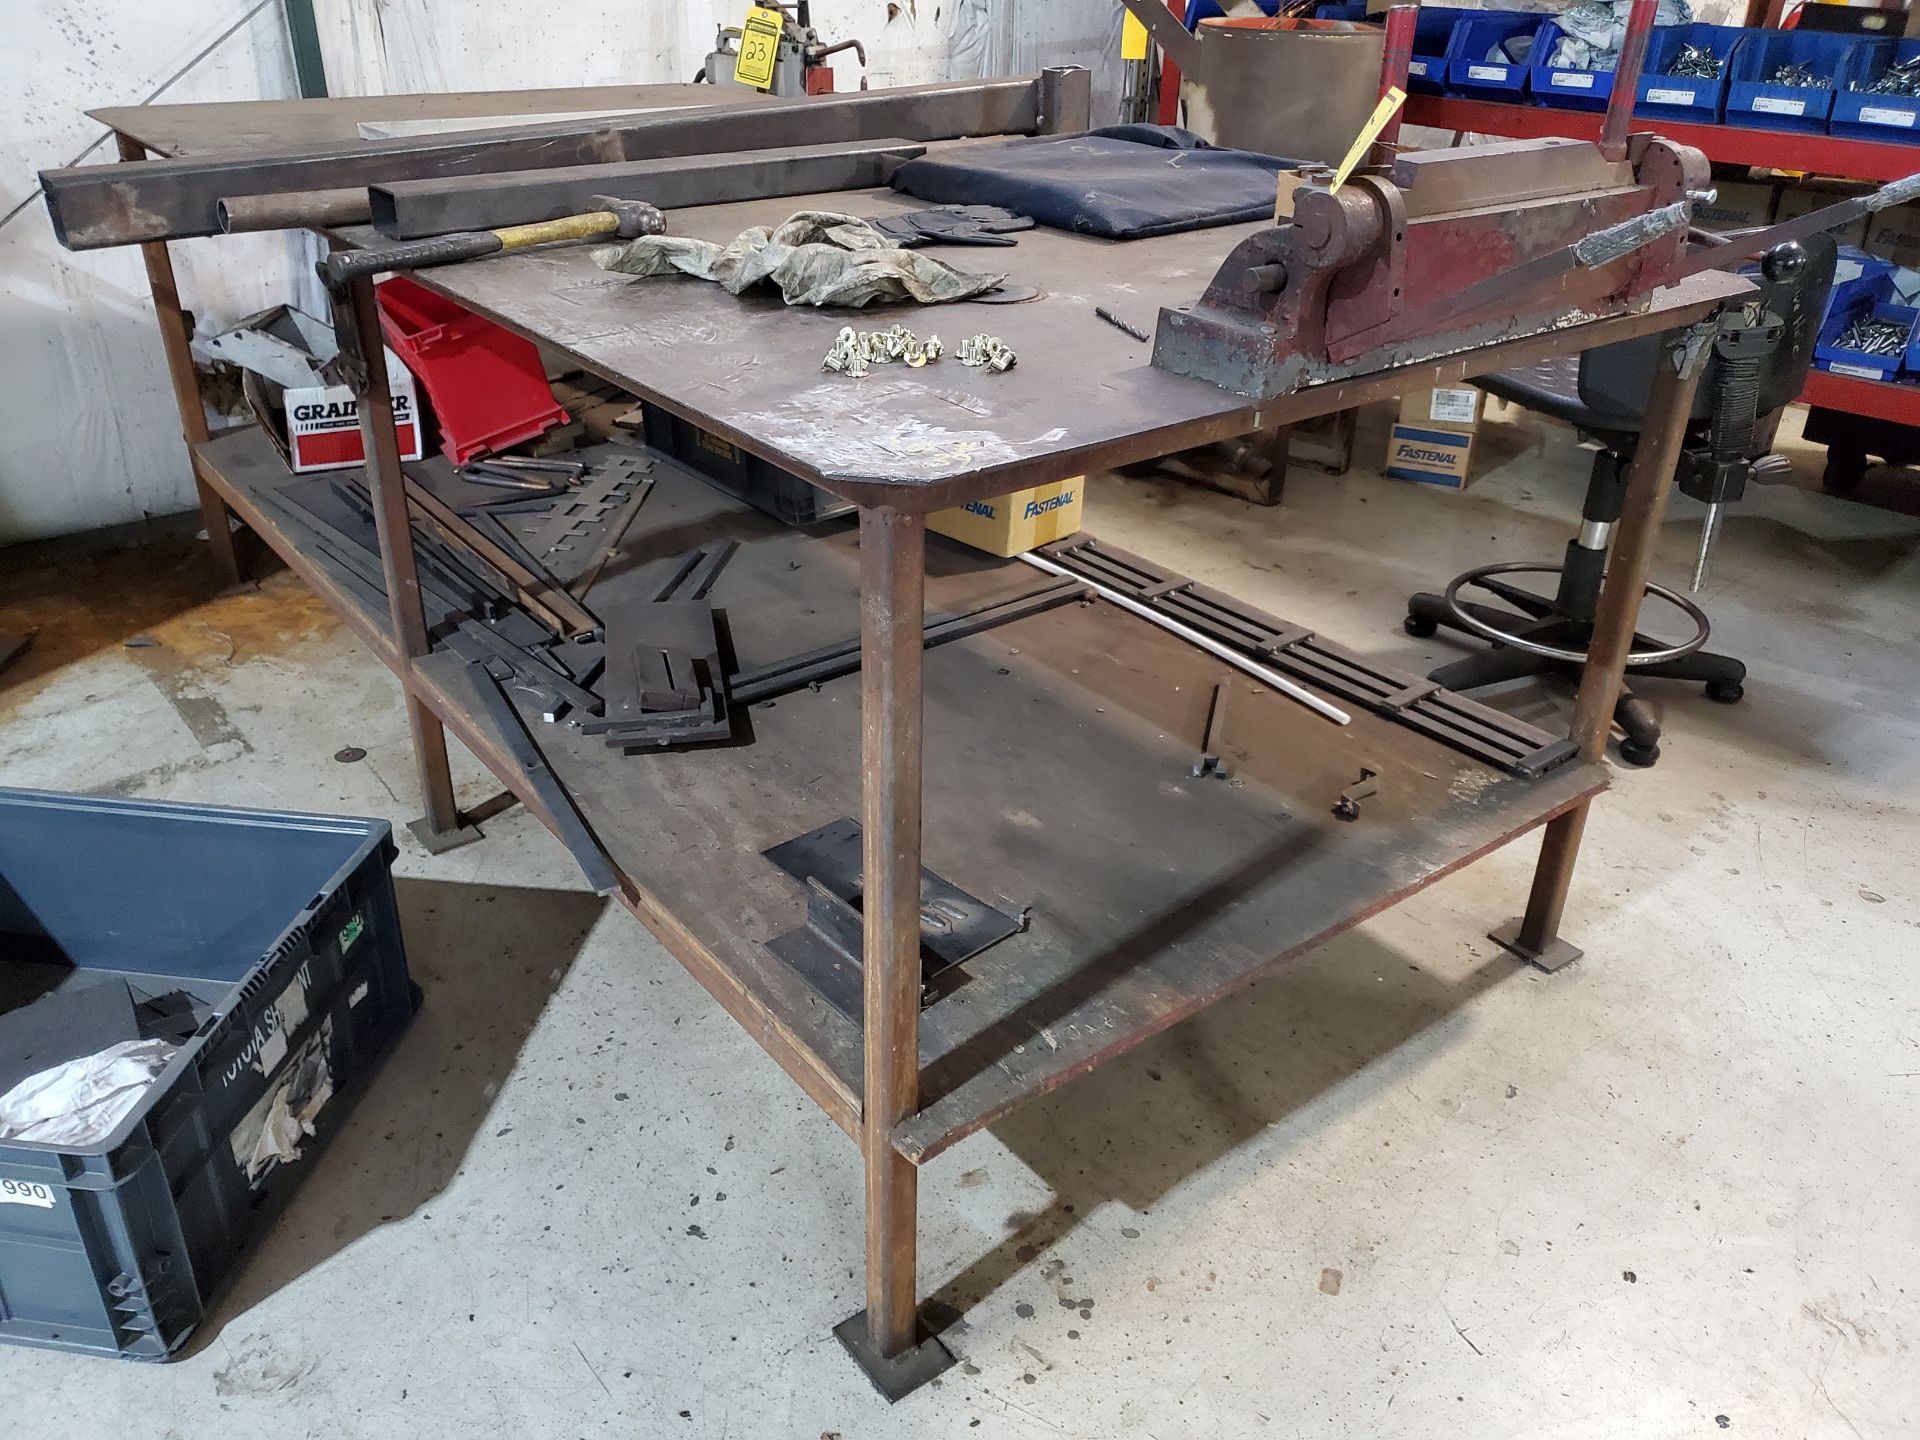 96'' X 48-1/2'' X 1/4'' STEEL WELDING TABLE WITH DI-ACRO NO.2 BENCH- TOP PAN BRAKE